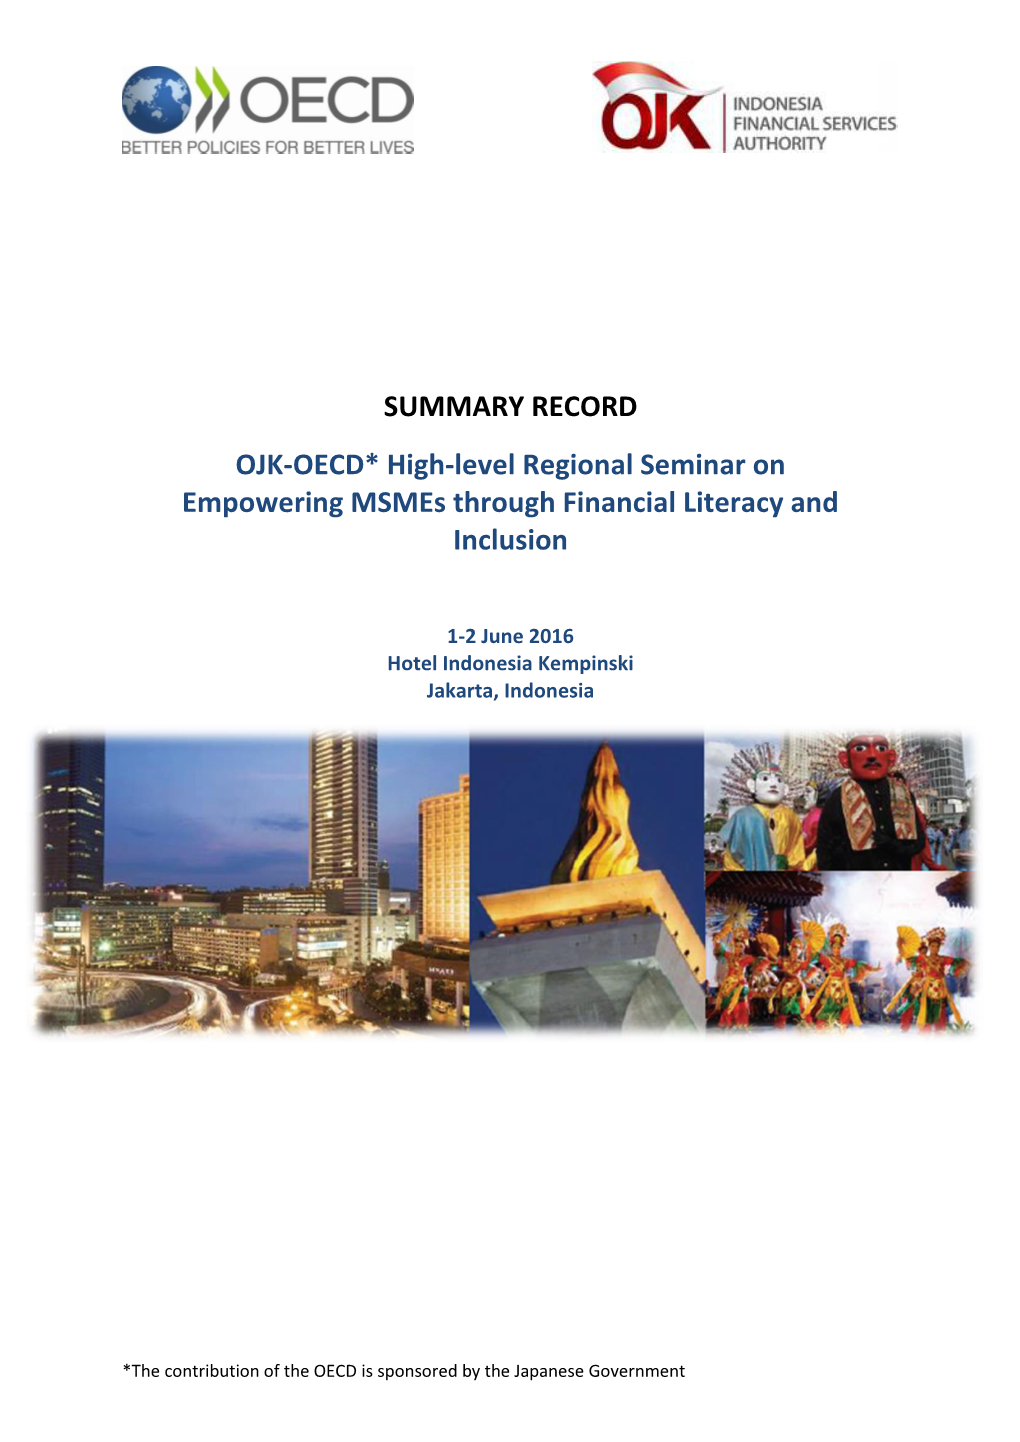 SUMMARY RECORD OJK-OECD* High-Level Regional Seminar on Empowering Msmes Through Financial Literacy and Inclusion